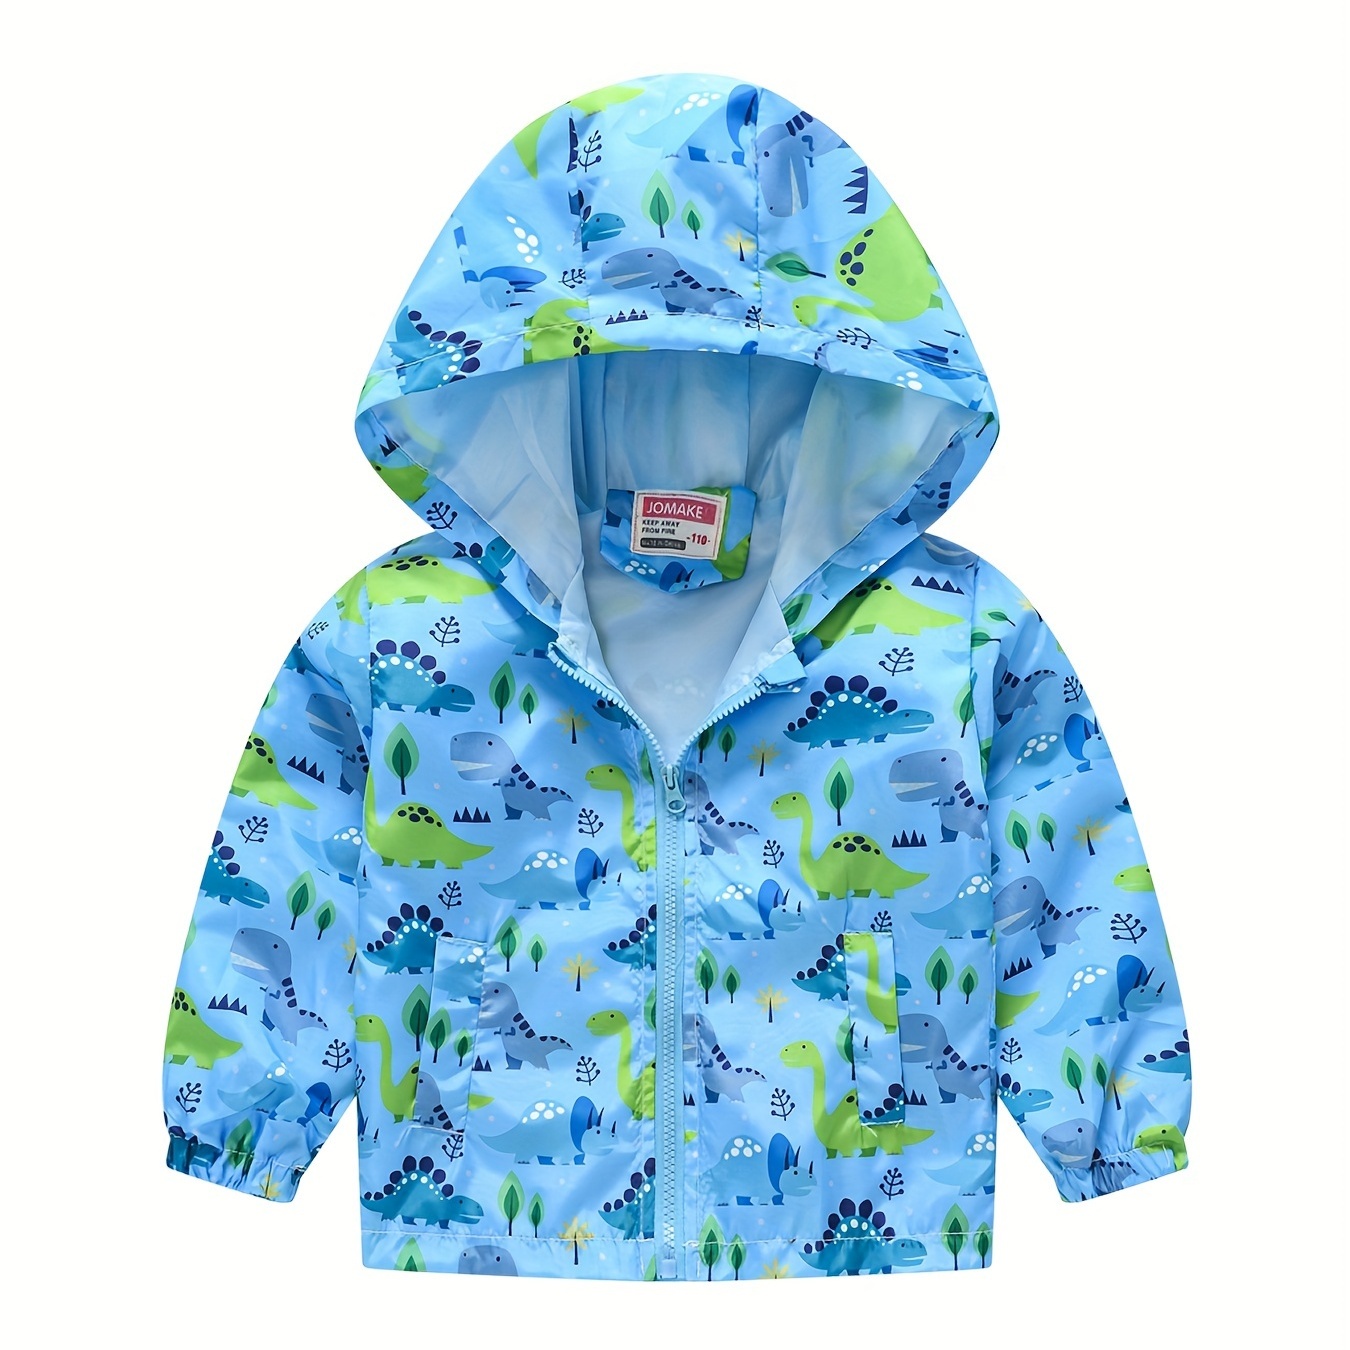 

Boys Teen Cute Dinosaur Graphic Print Zipper Hooded Jacket Coat Clothes For Spring Fall